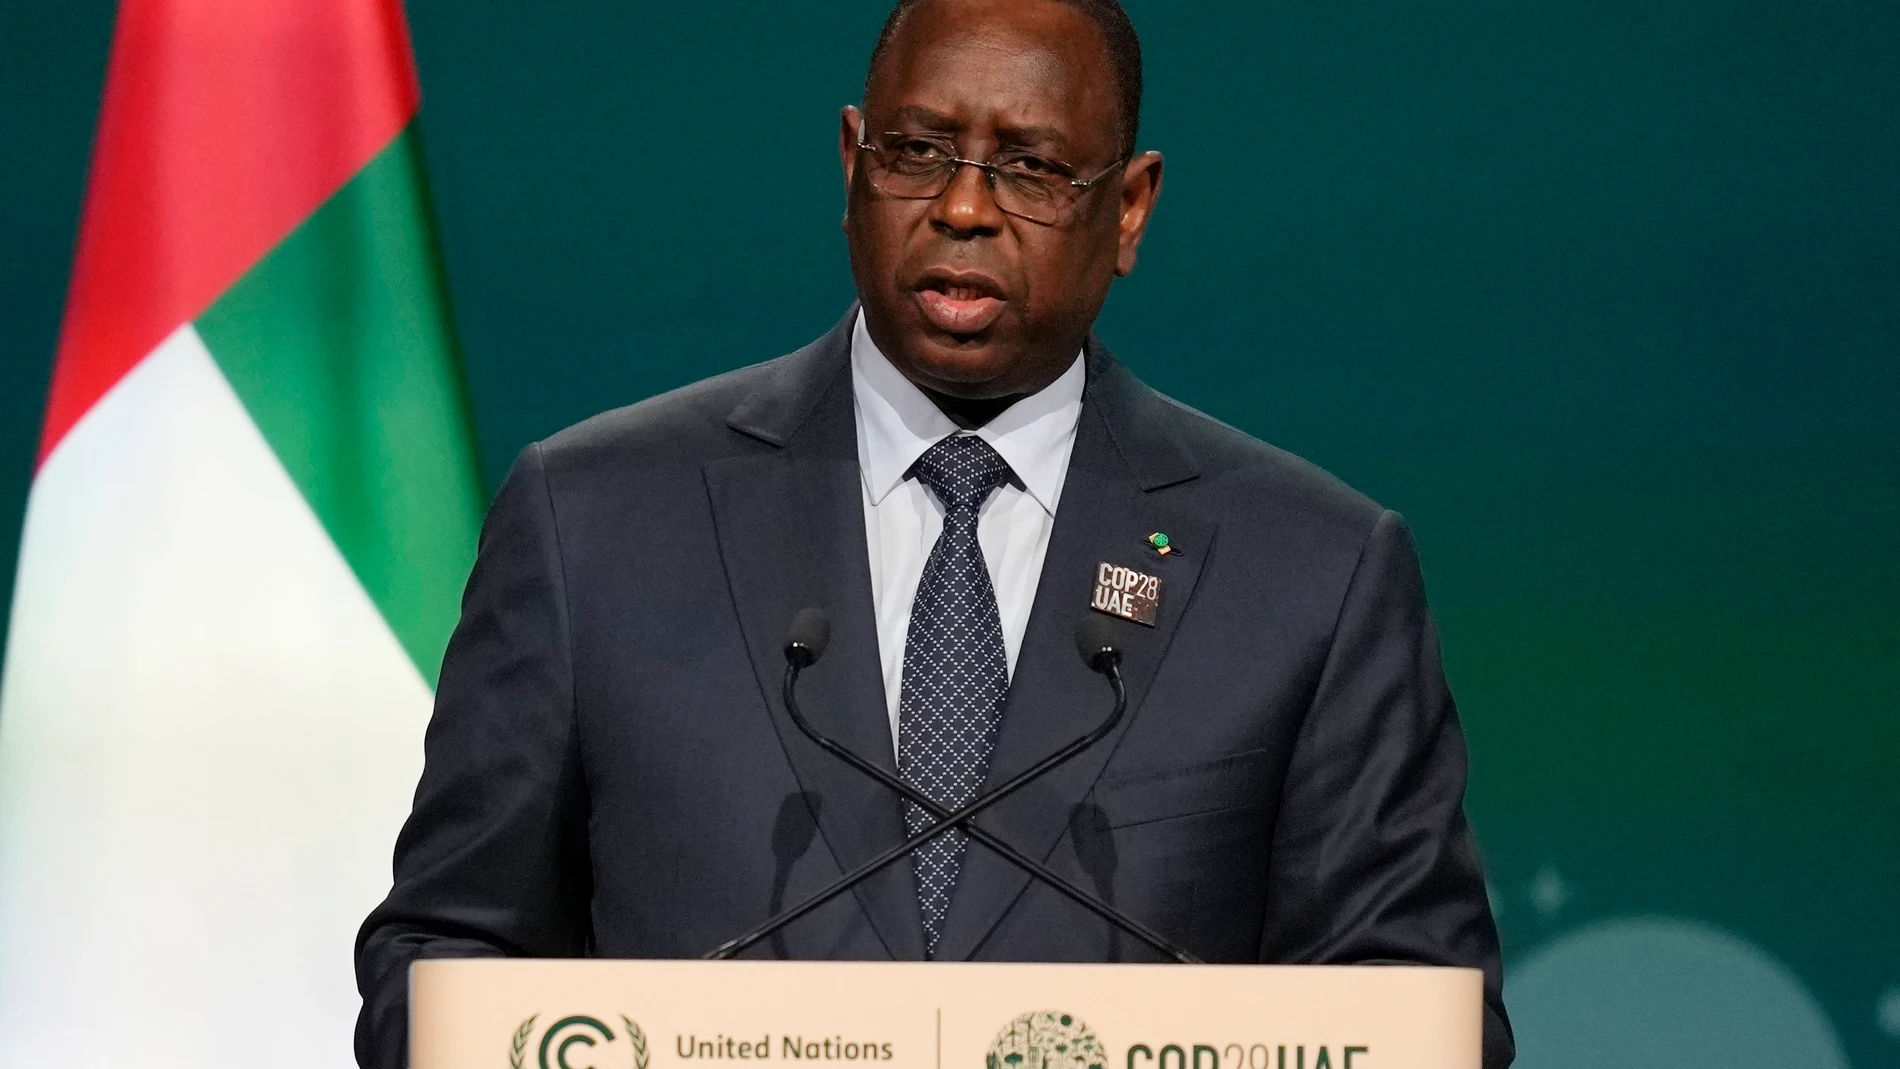 FILE - Senegal's President Macky Sall speaks during a plenary session at the COP28 U.N. Climate Summit, Friday, Dec. 1, 2023, in Dubai, United Arab Emirates. Senegalese President Macky Sall on Saturday, Feb. 3, 2024, postponed presidential elections scheduled for Feb. 25, citing controversies over the disqualification of some candidates and allegations of corruption in election-related cases. (AP Photo/Rafiq Maqbool, File)